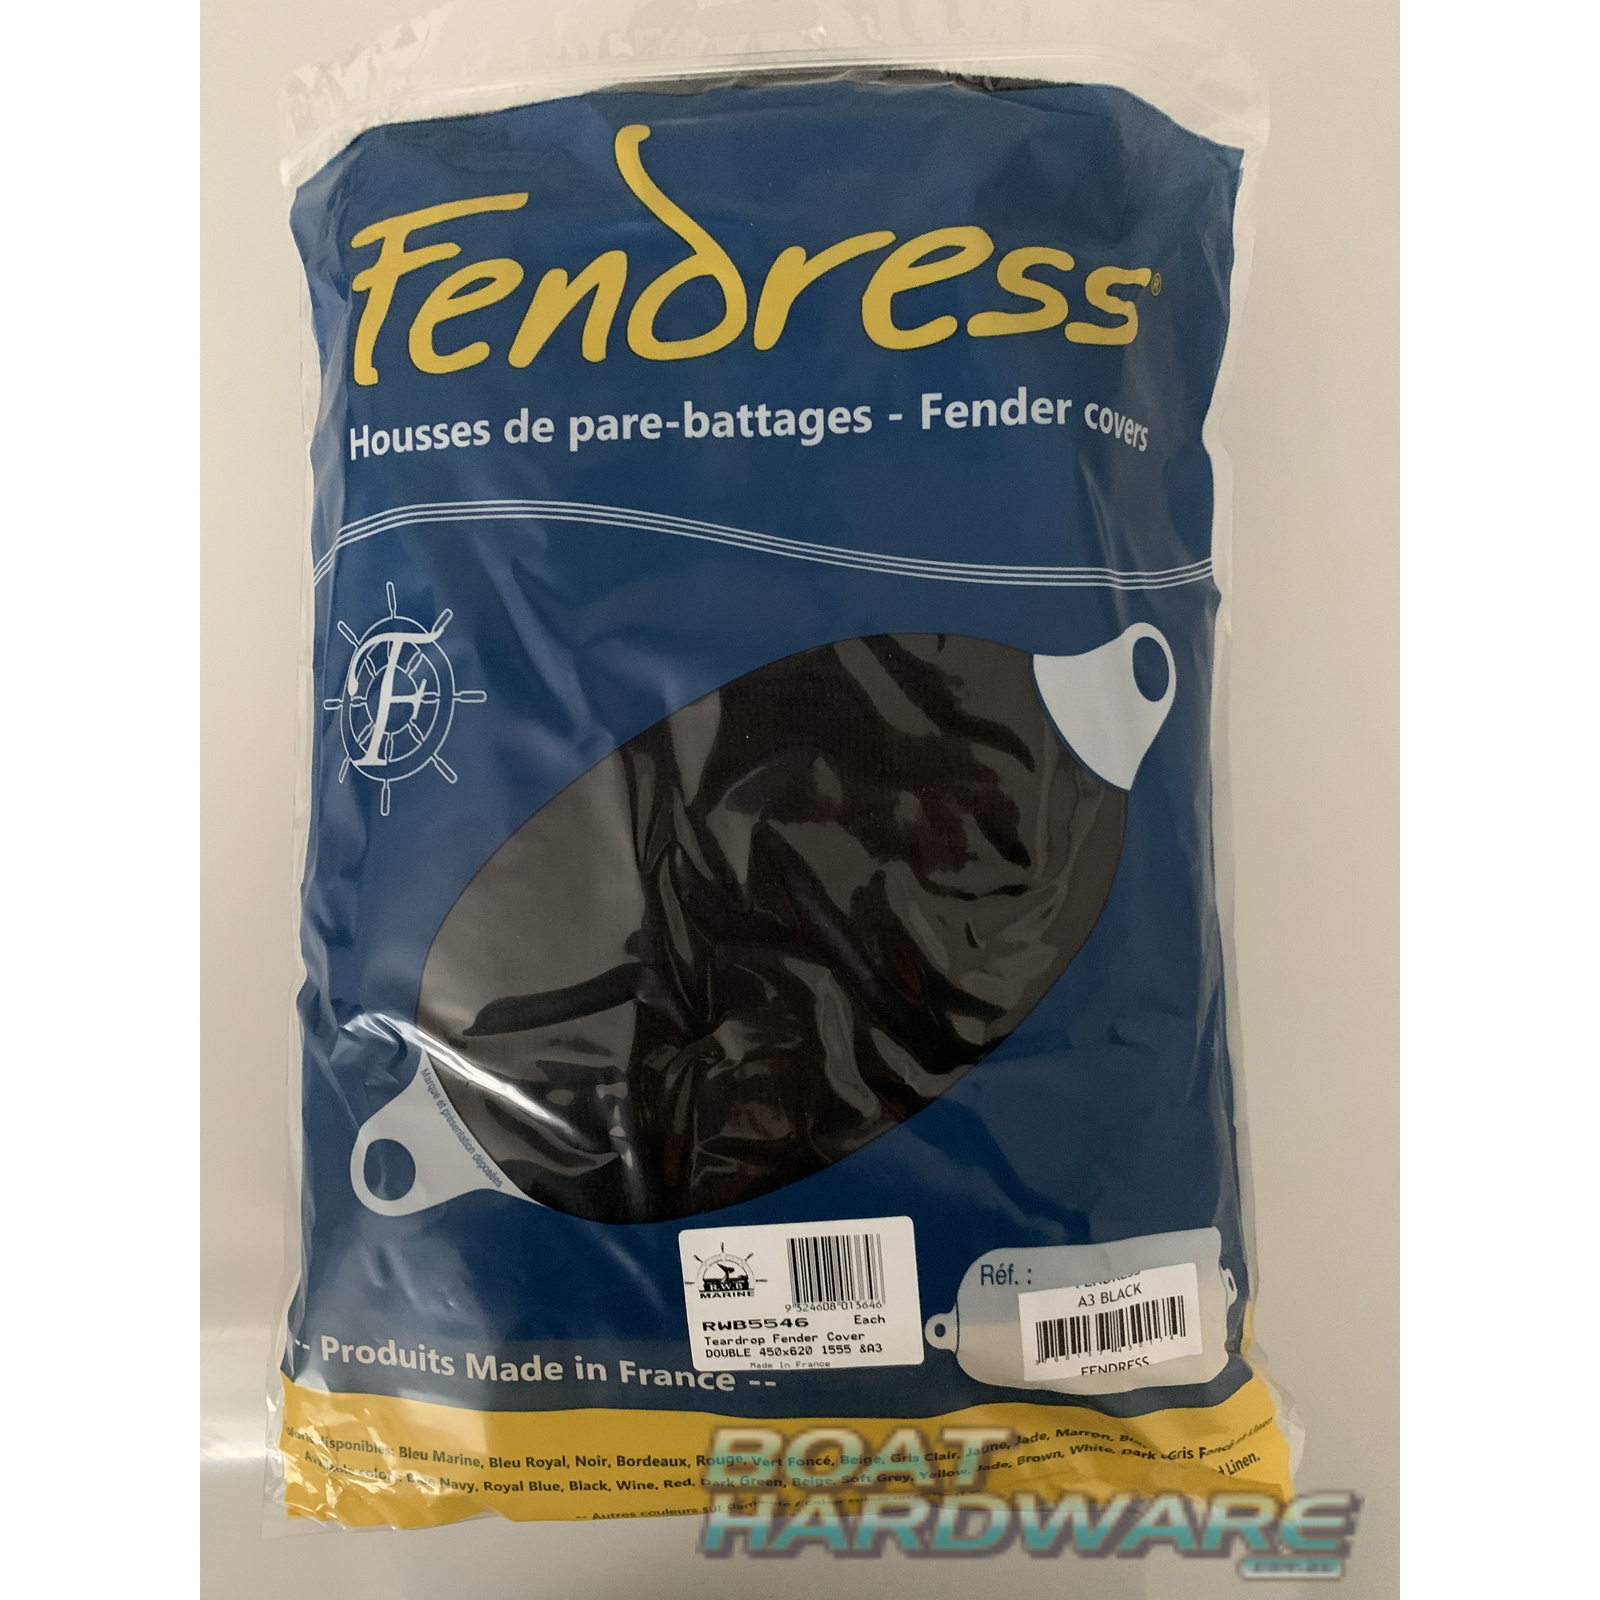 Fendress Teardrop Fender COVER 450x620mm - Black Double Thickness